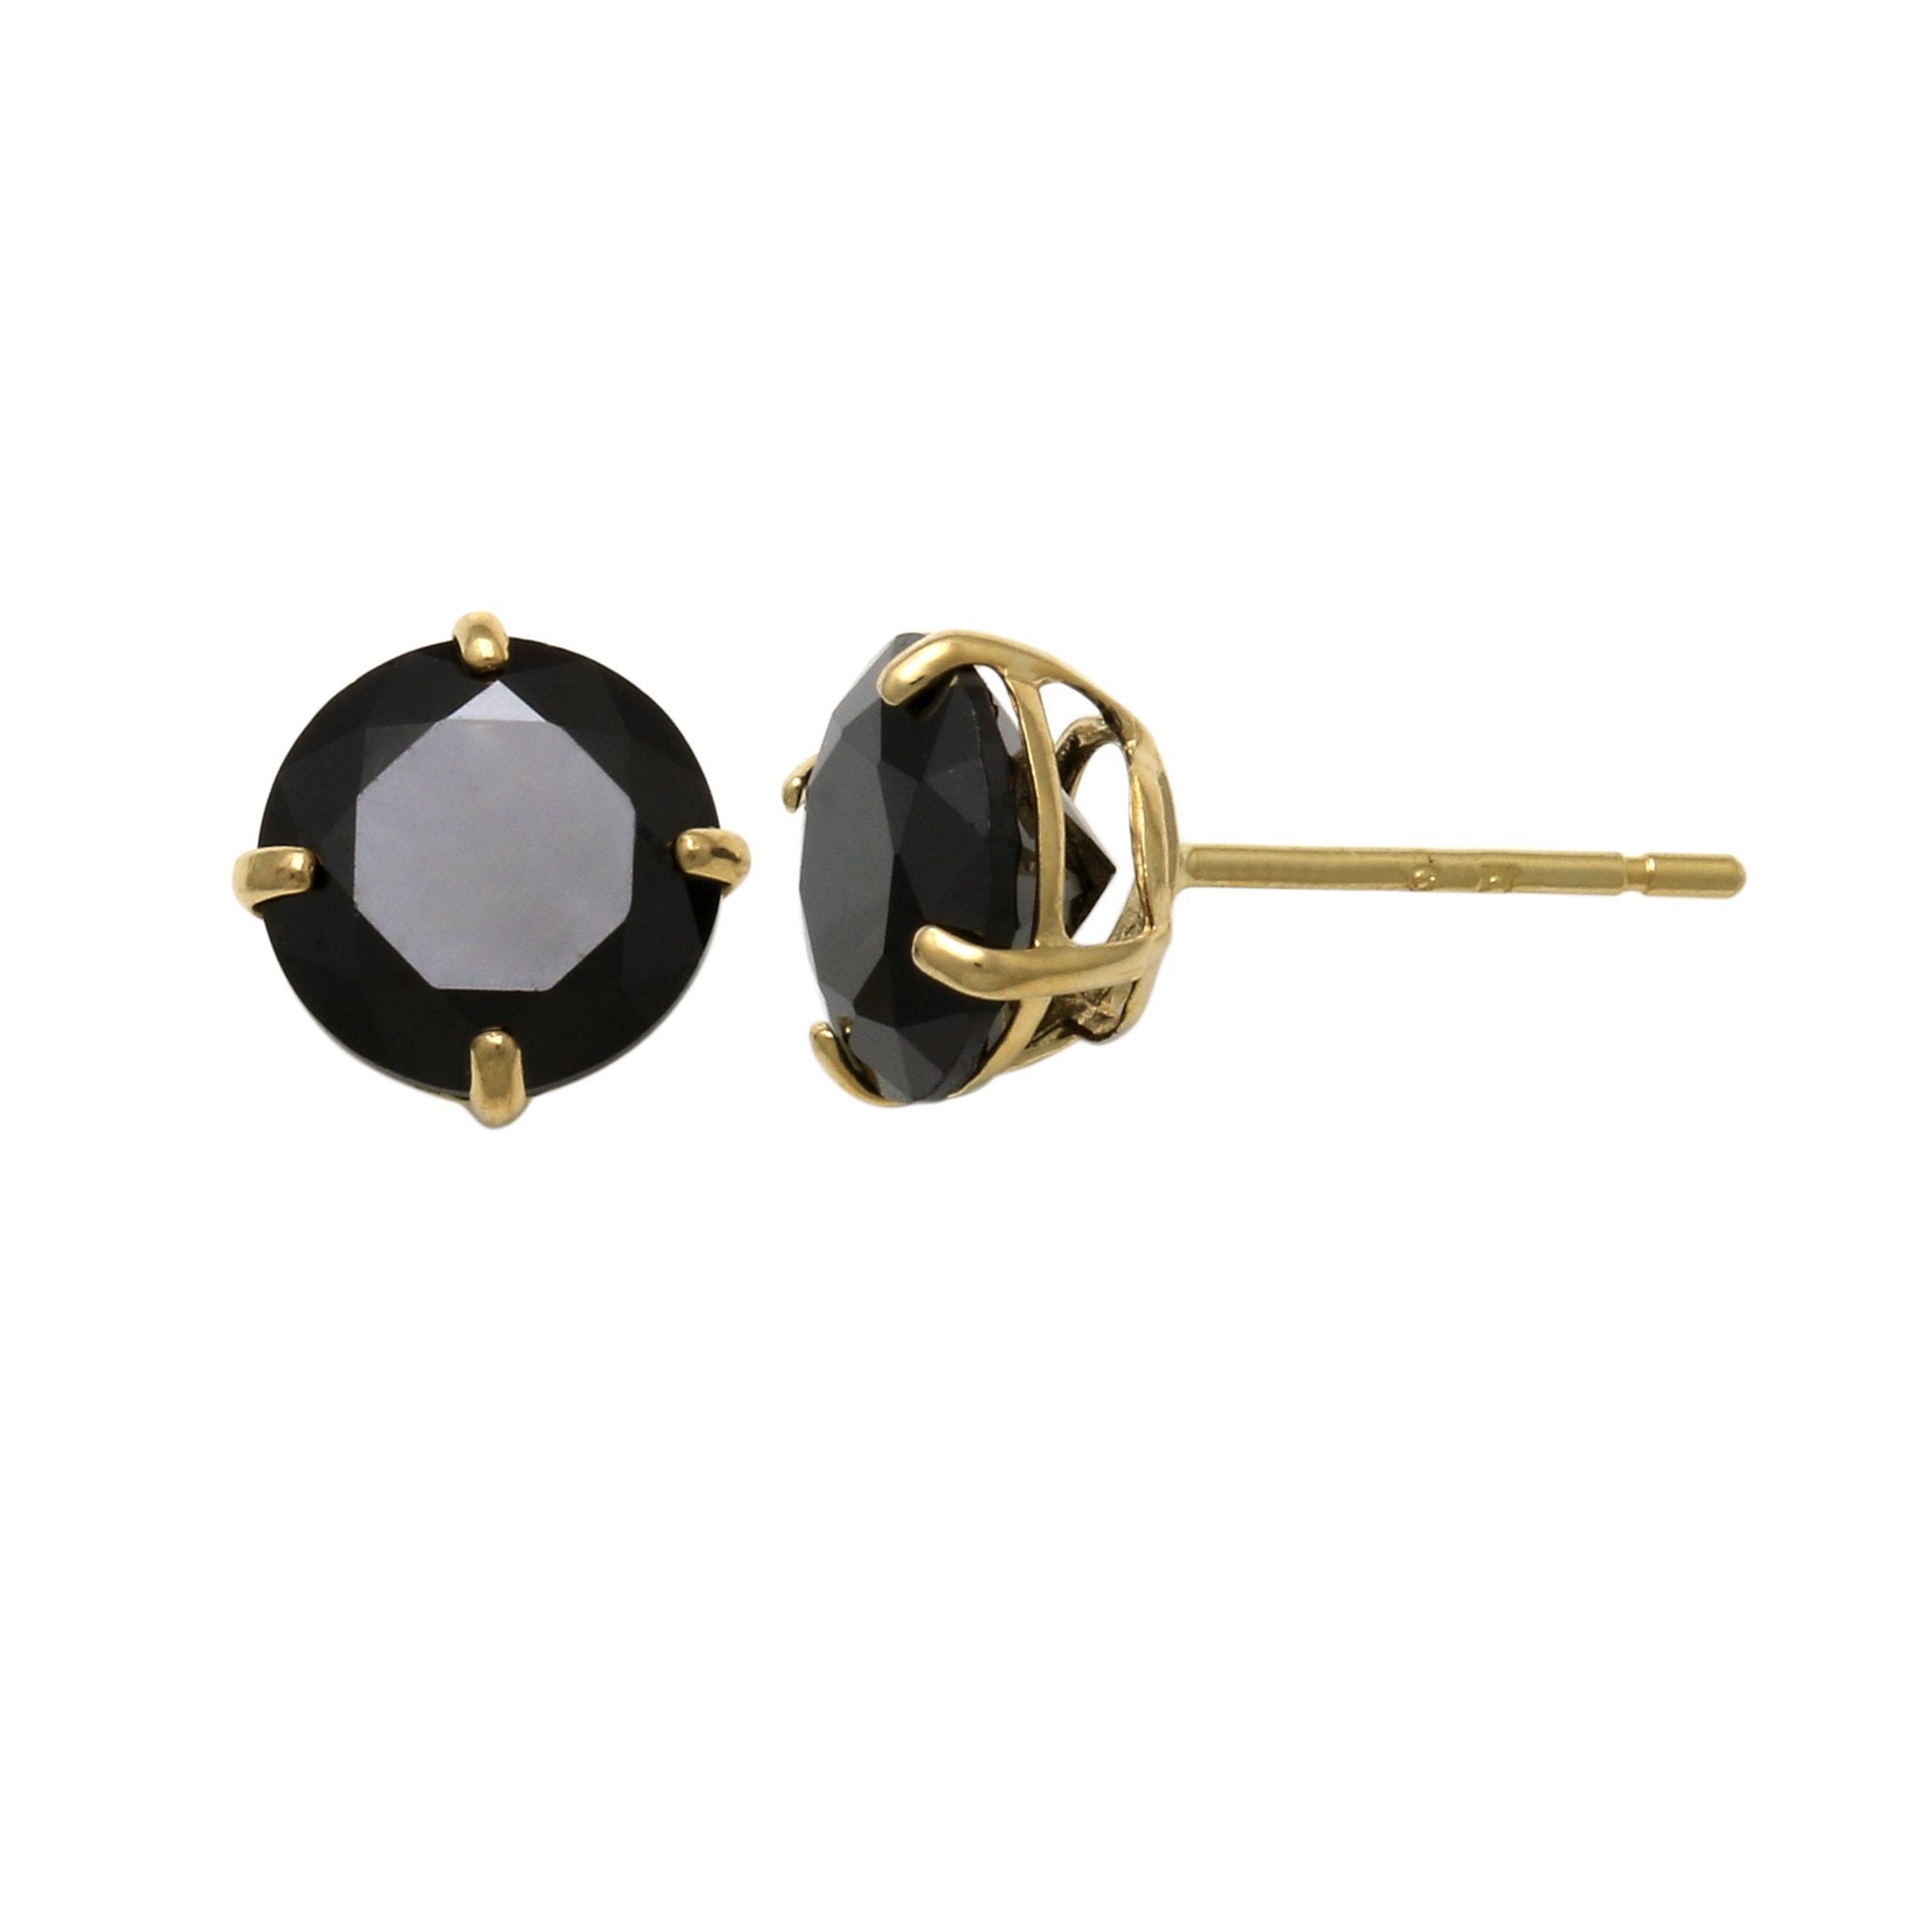 14K Solid Gold Round Black Cubic Zirconia Stud Earrings - Anygolds 